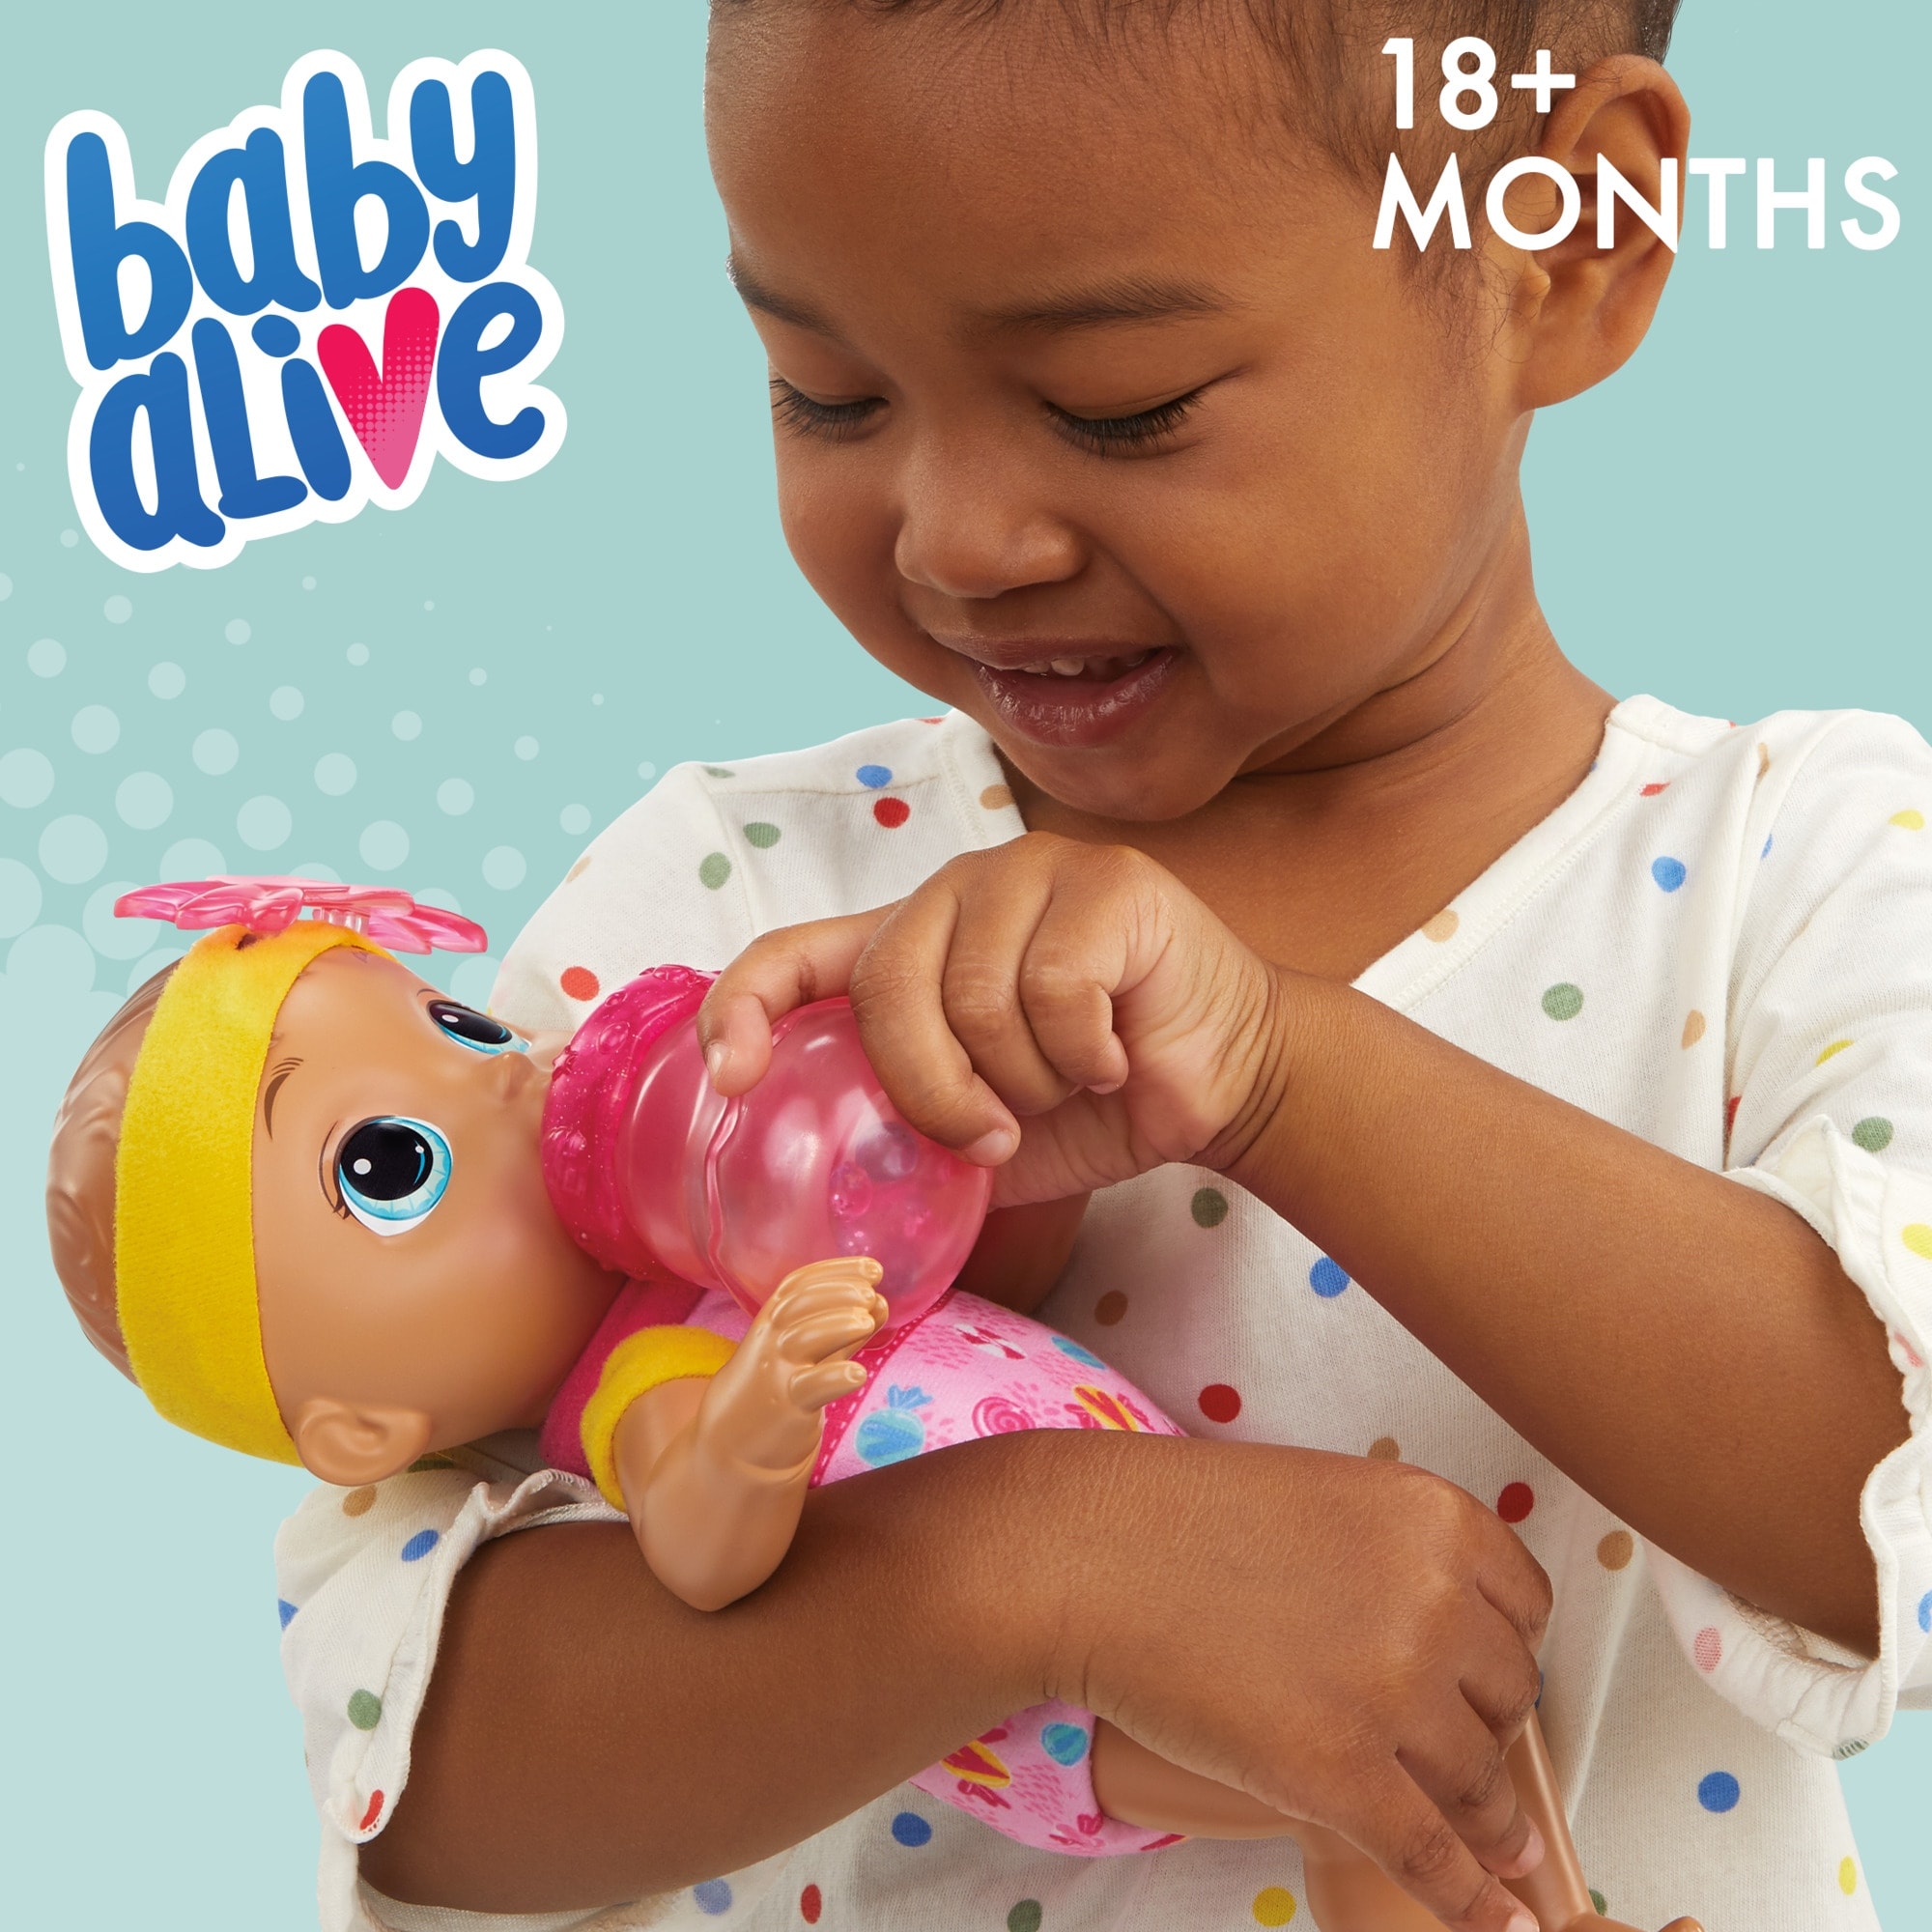 the first baby alive